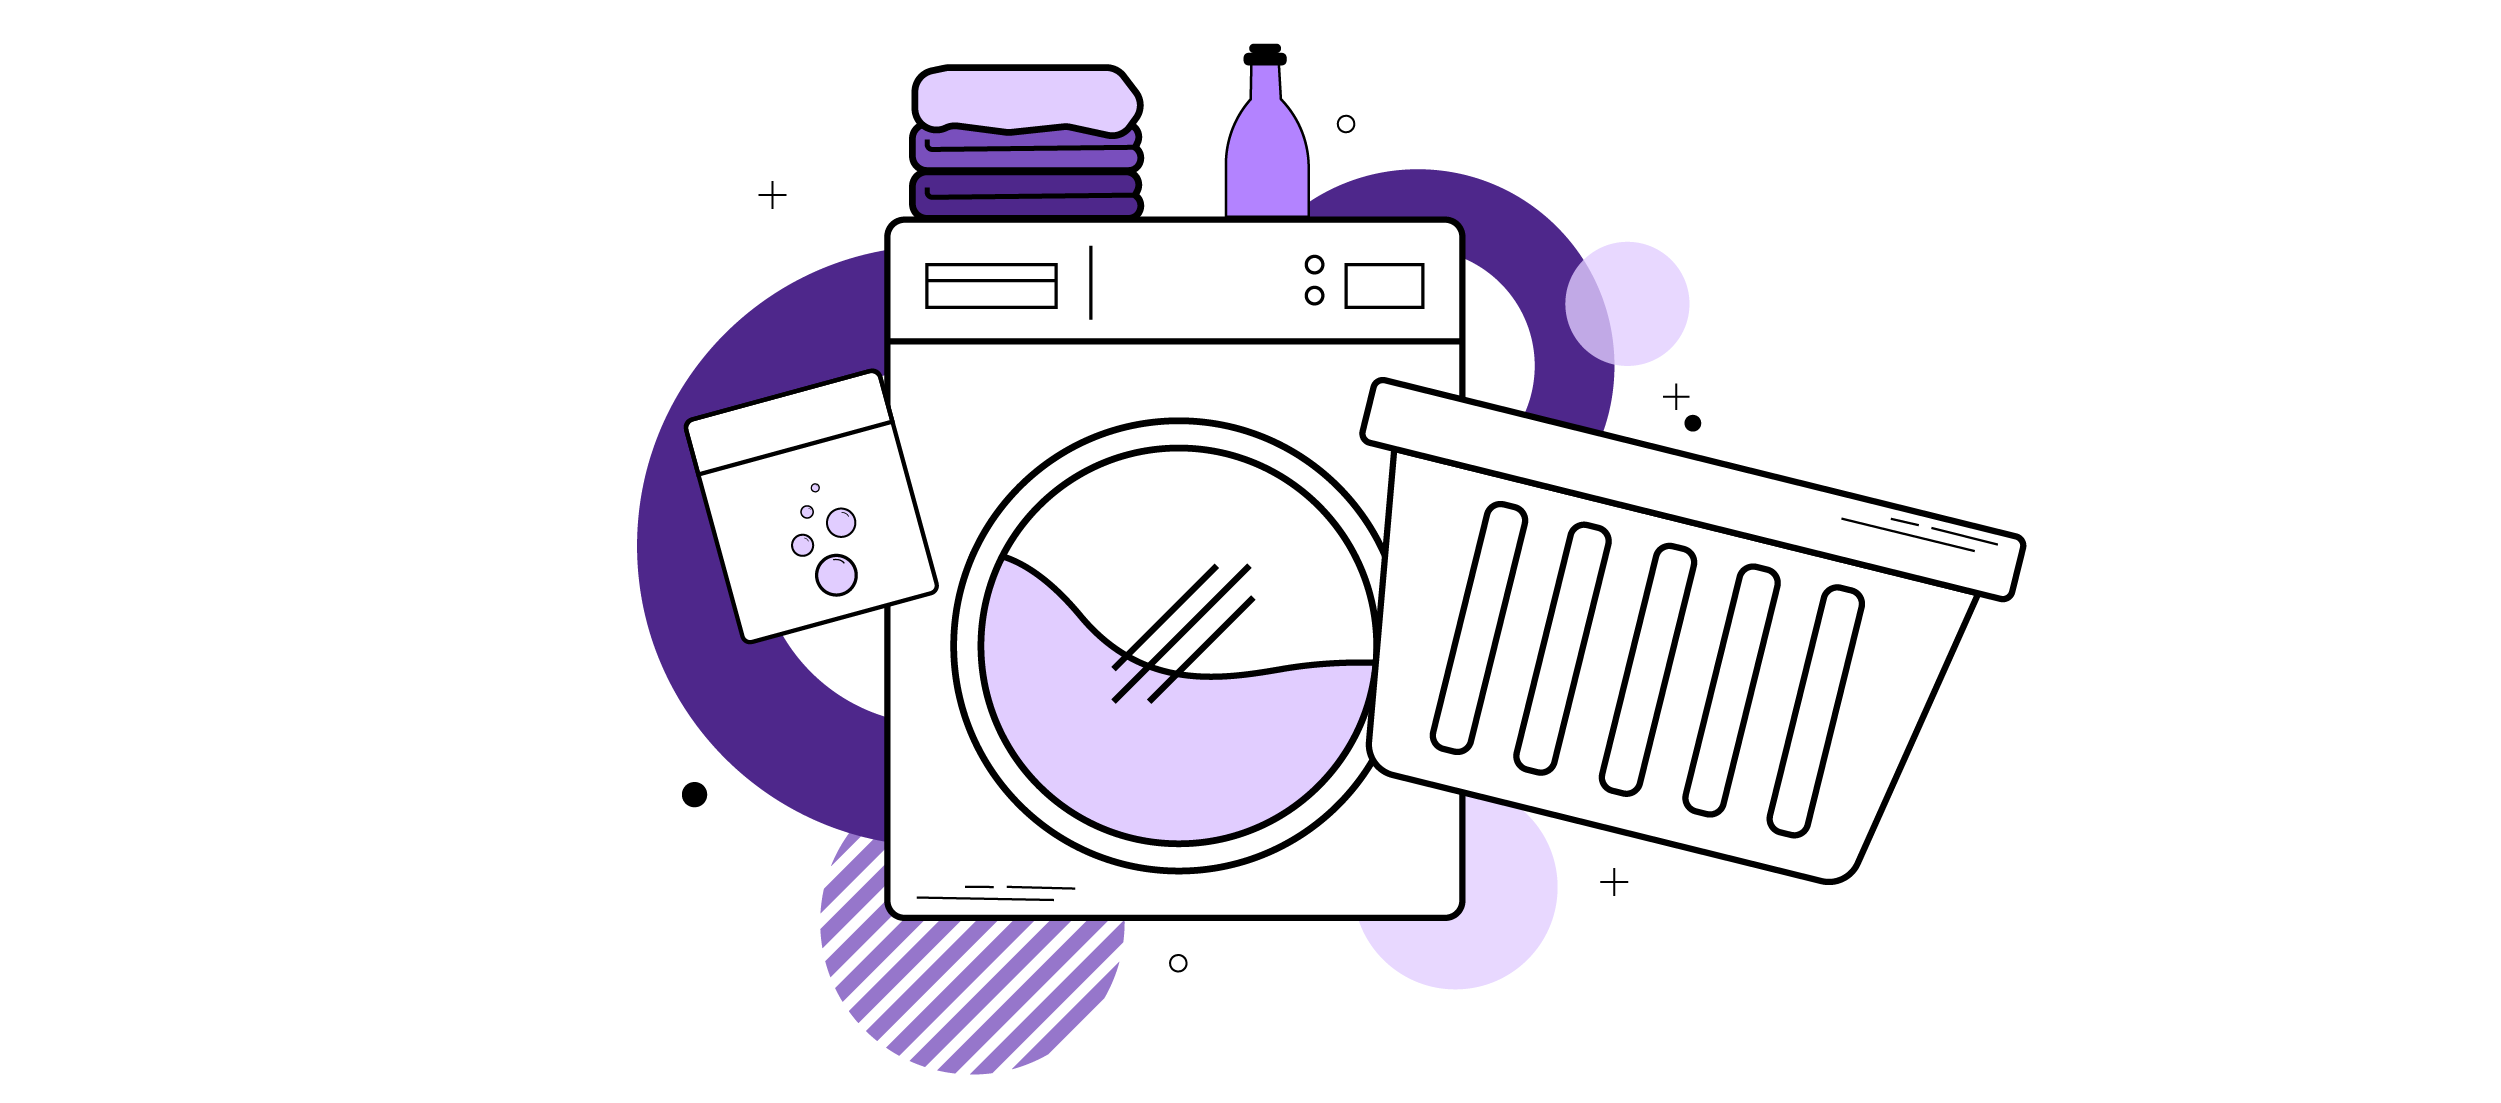 An illustration of a washing machine, surrounded by other laundry materials.